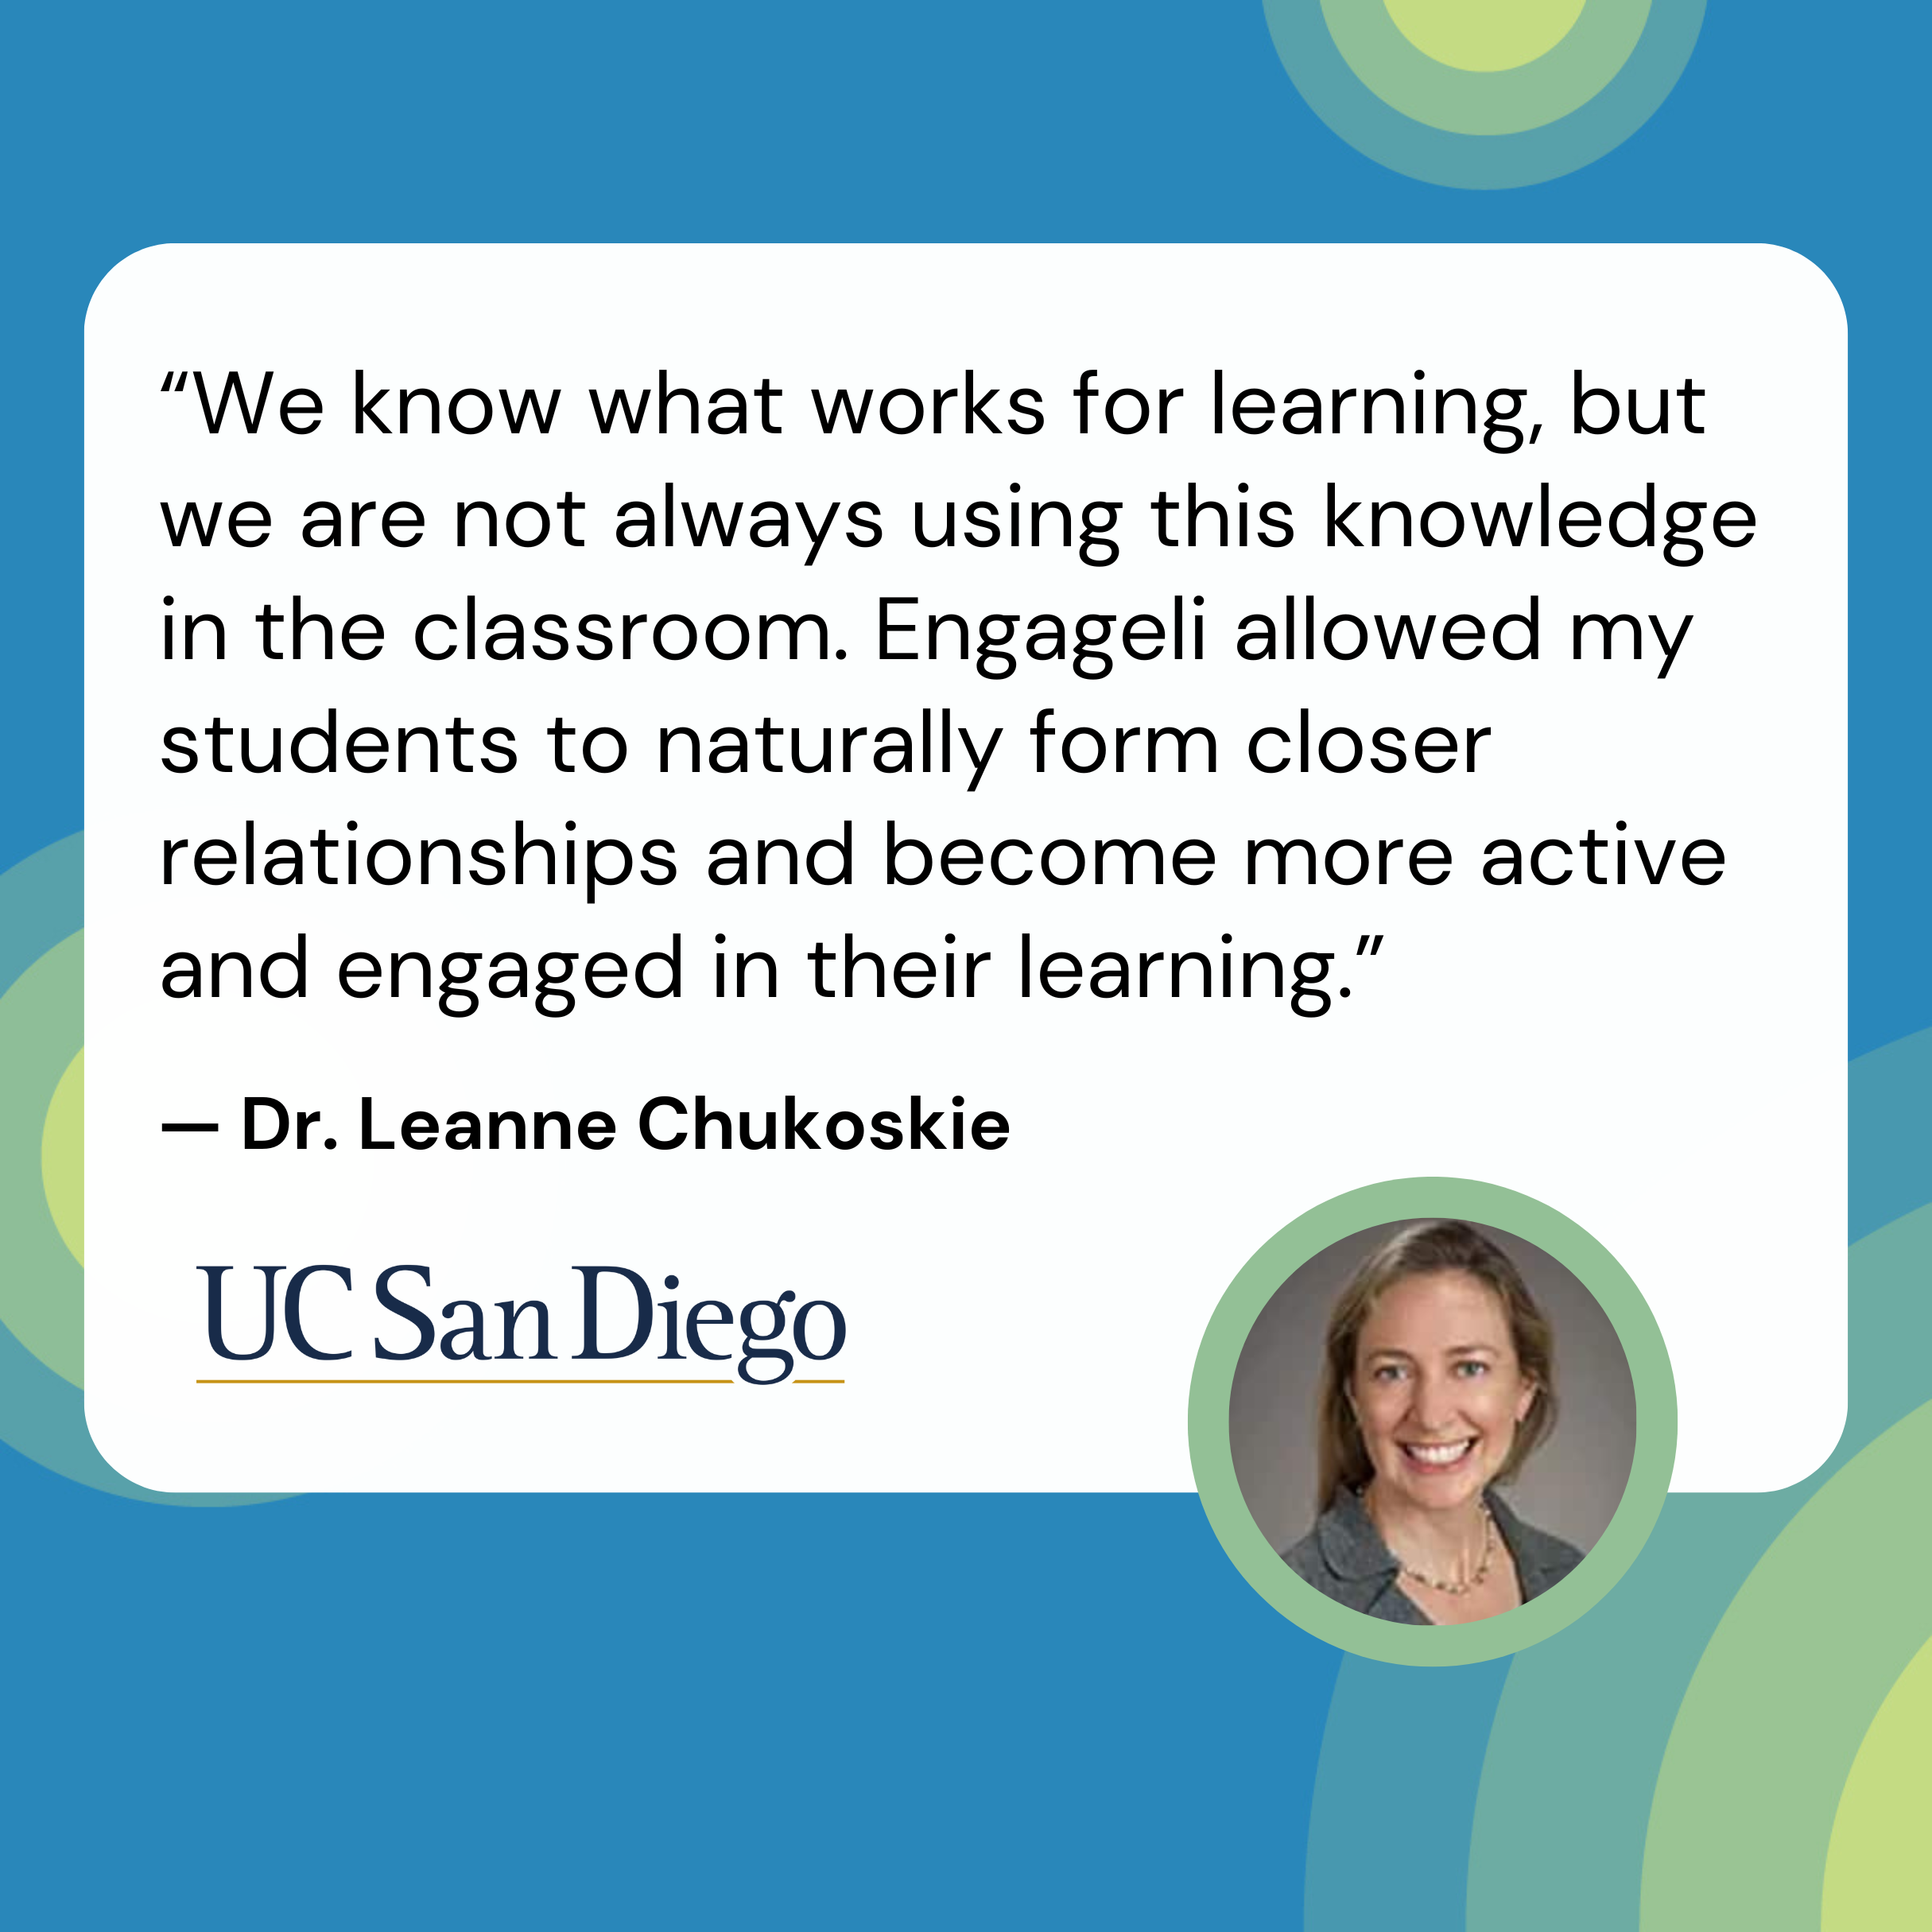 “We know what works for learning, but we are not always using this knowledge in the classroom. Engageli allowed my students to naturally form closer relationships and become more active and engage